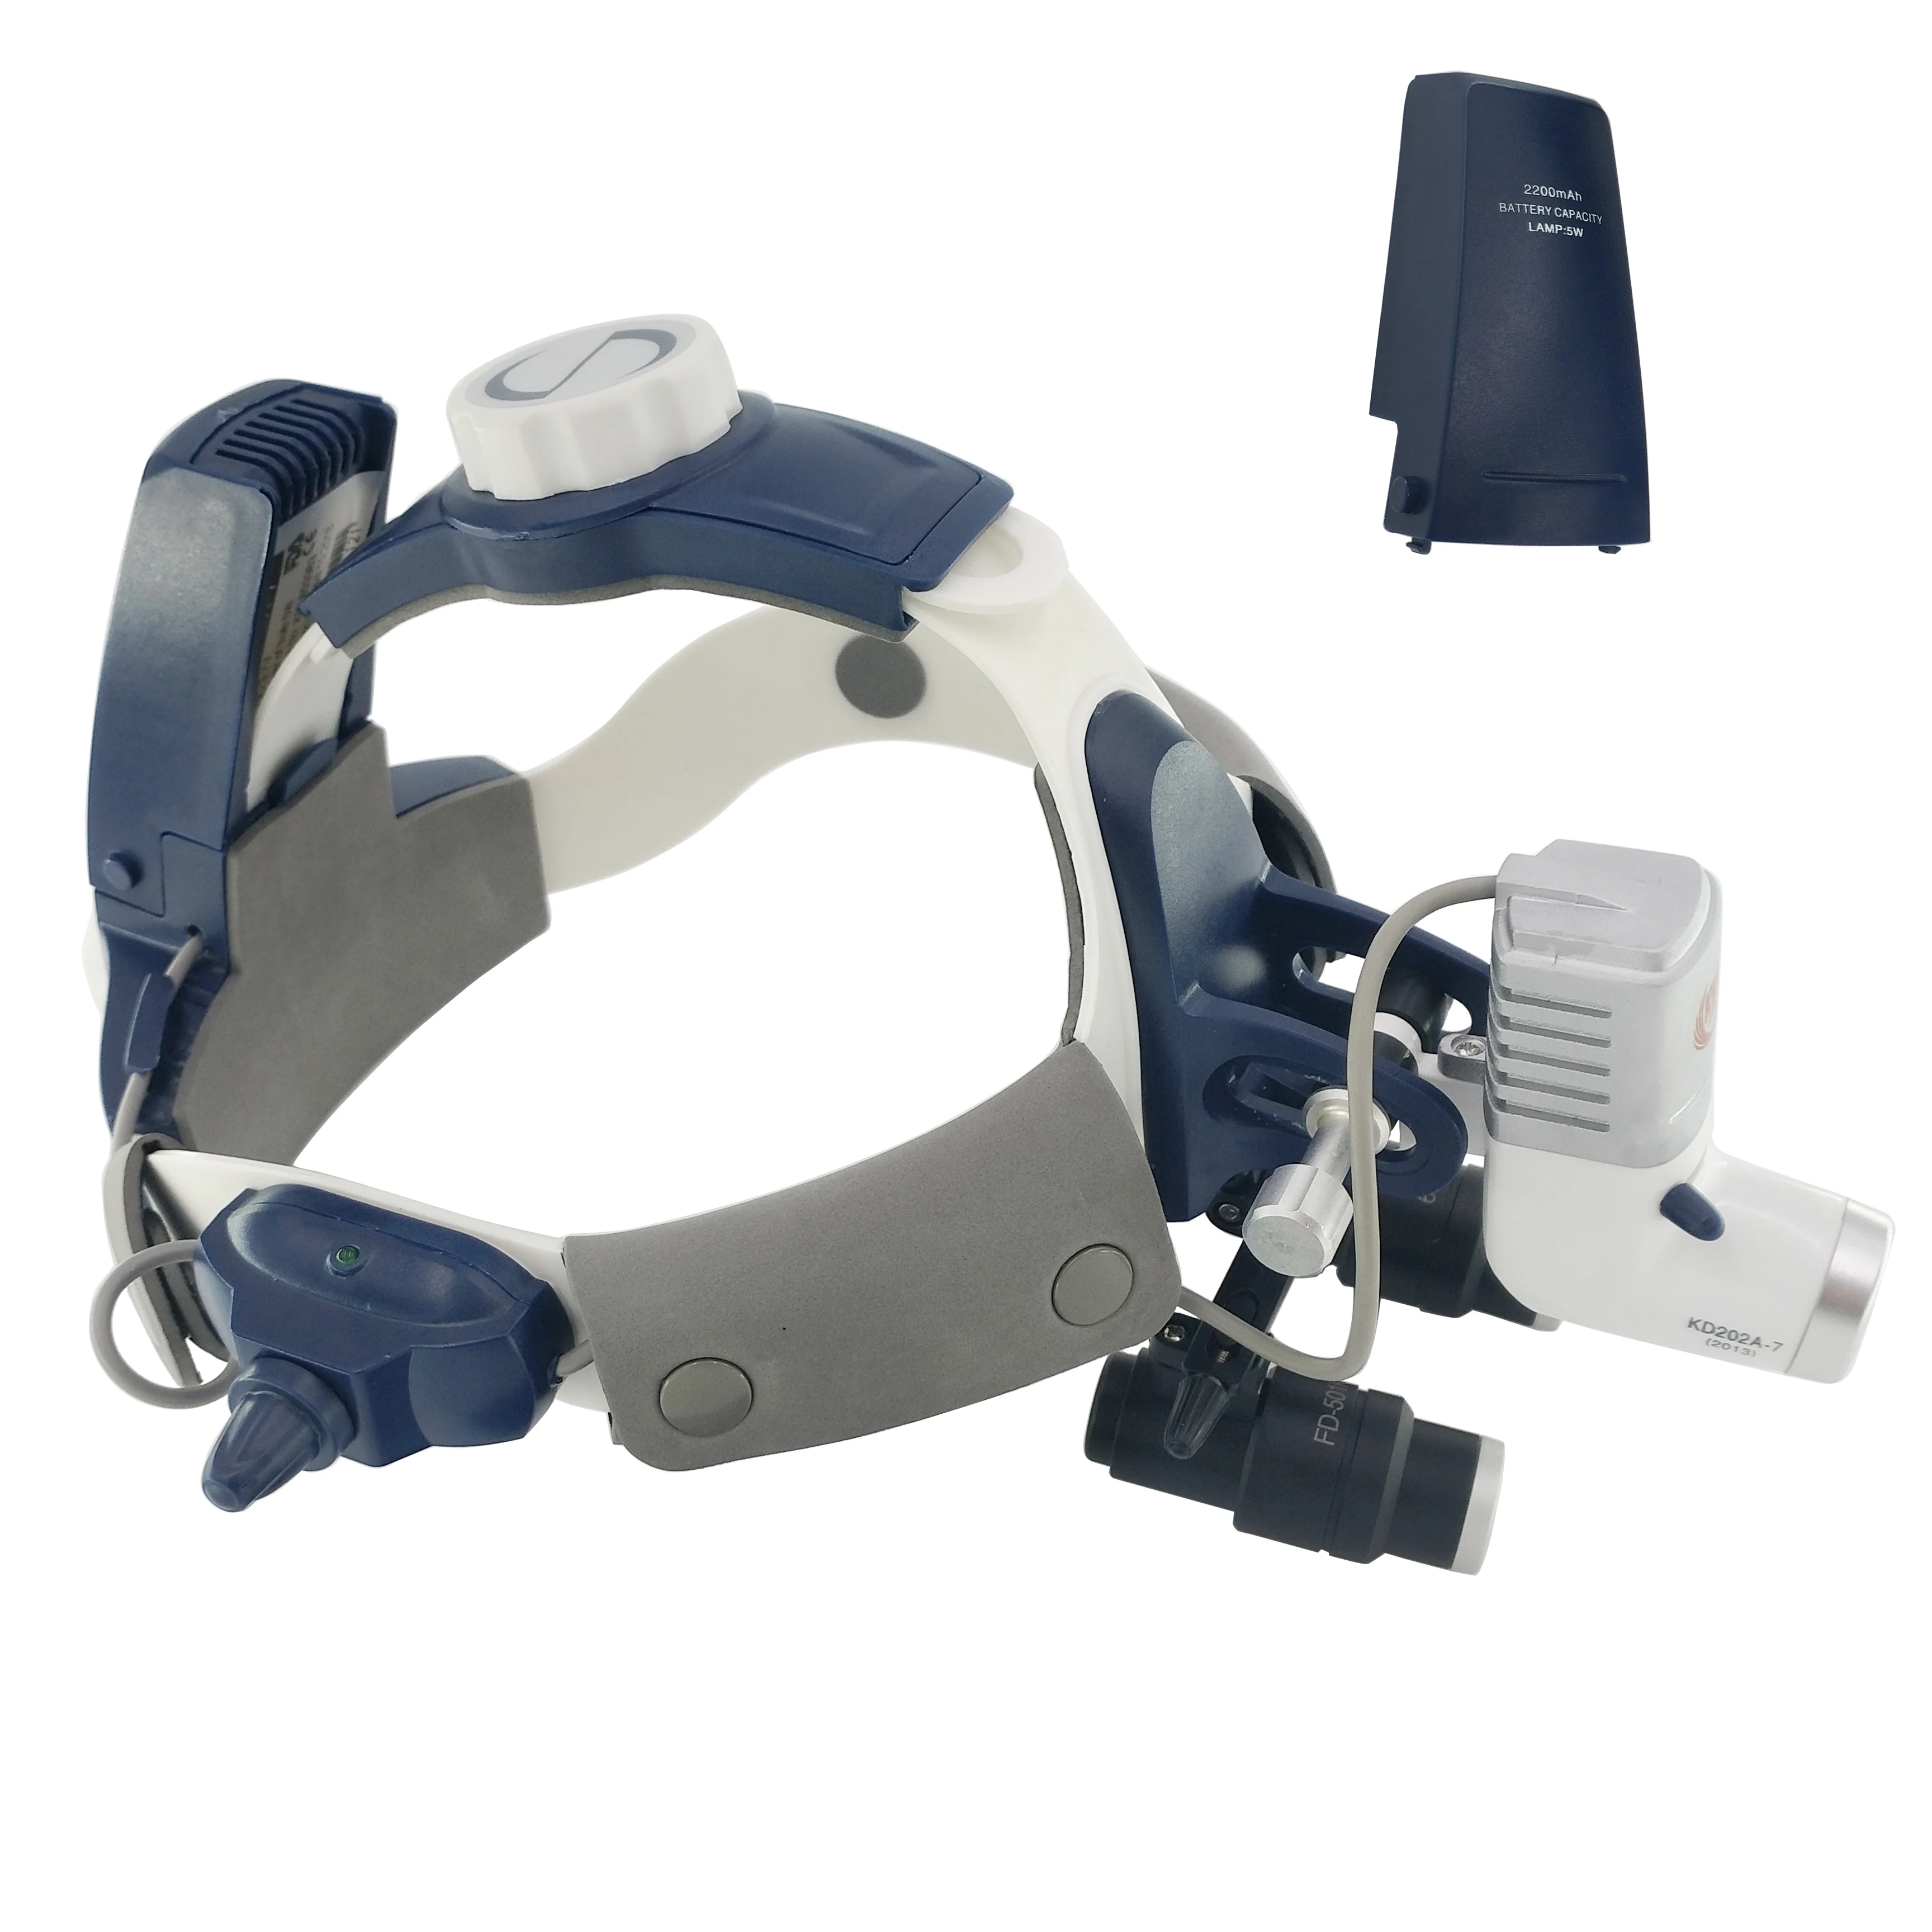 

Dental Wireless Medical Surgery Head Light for Sale Electric Ce Dental Loupes 5x Online Technical 65000 Lux